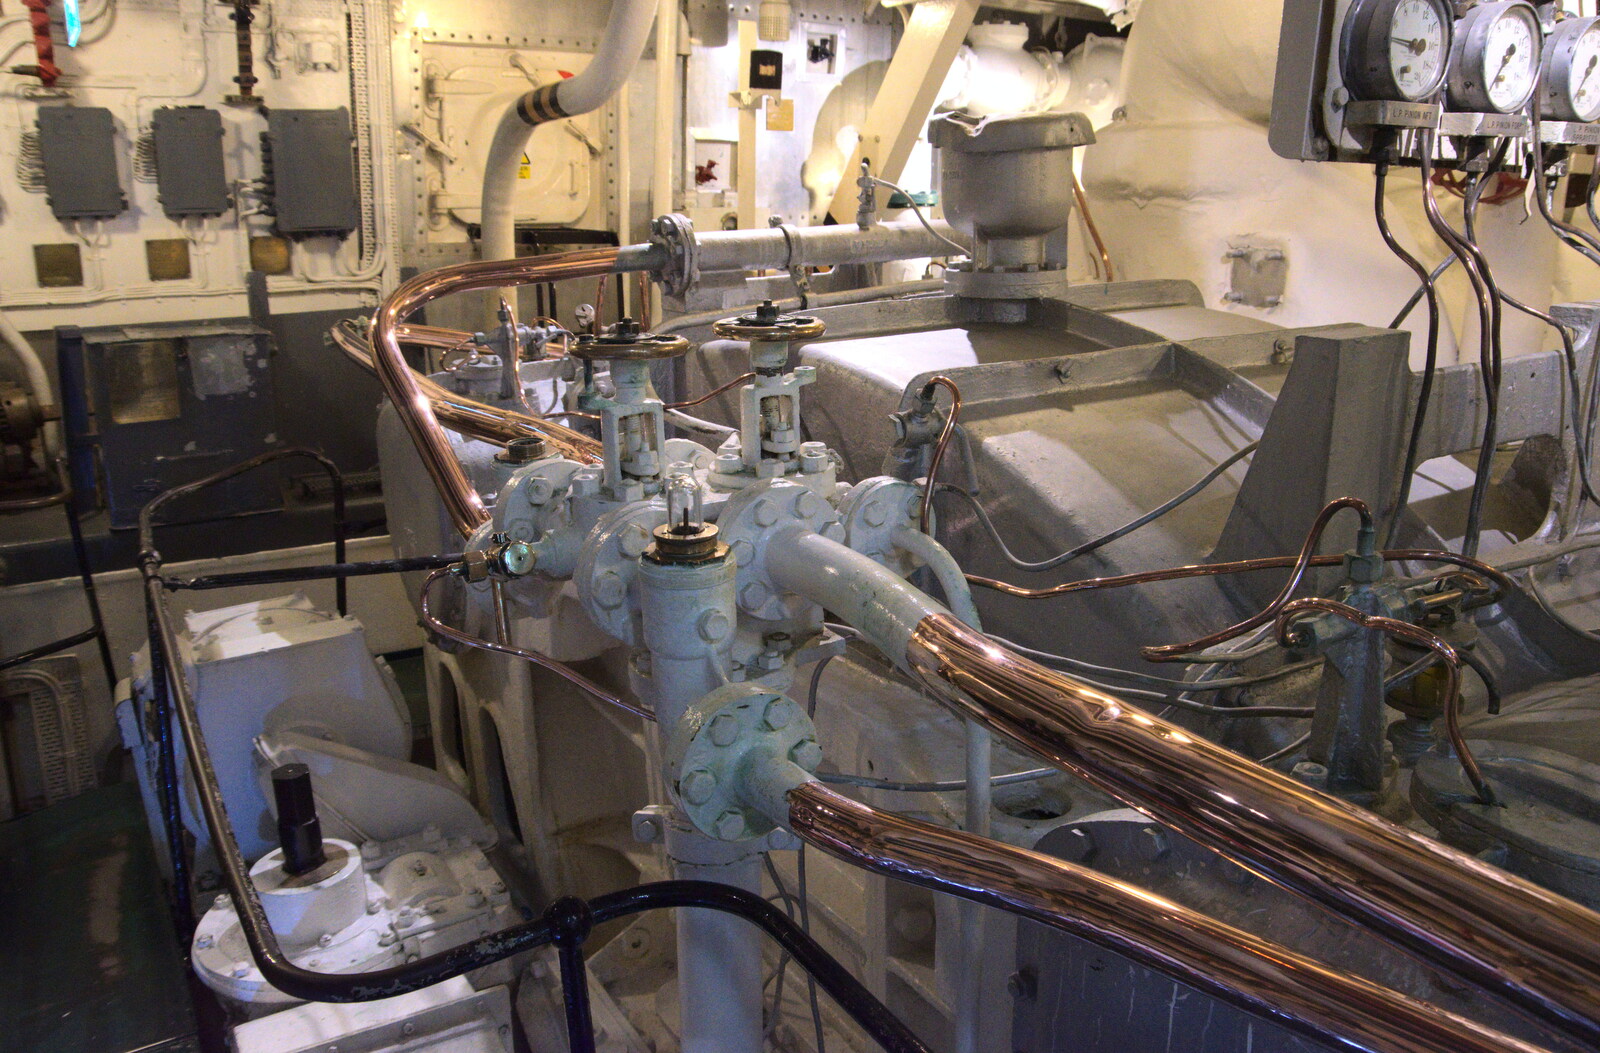 Shiny copper pipework from HMS Belfast and the South Bank, Southwark, London - 17th February 2020